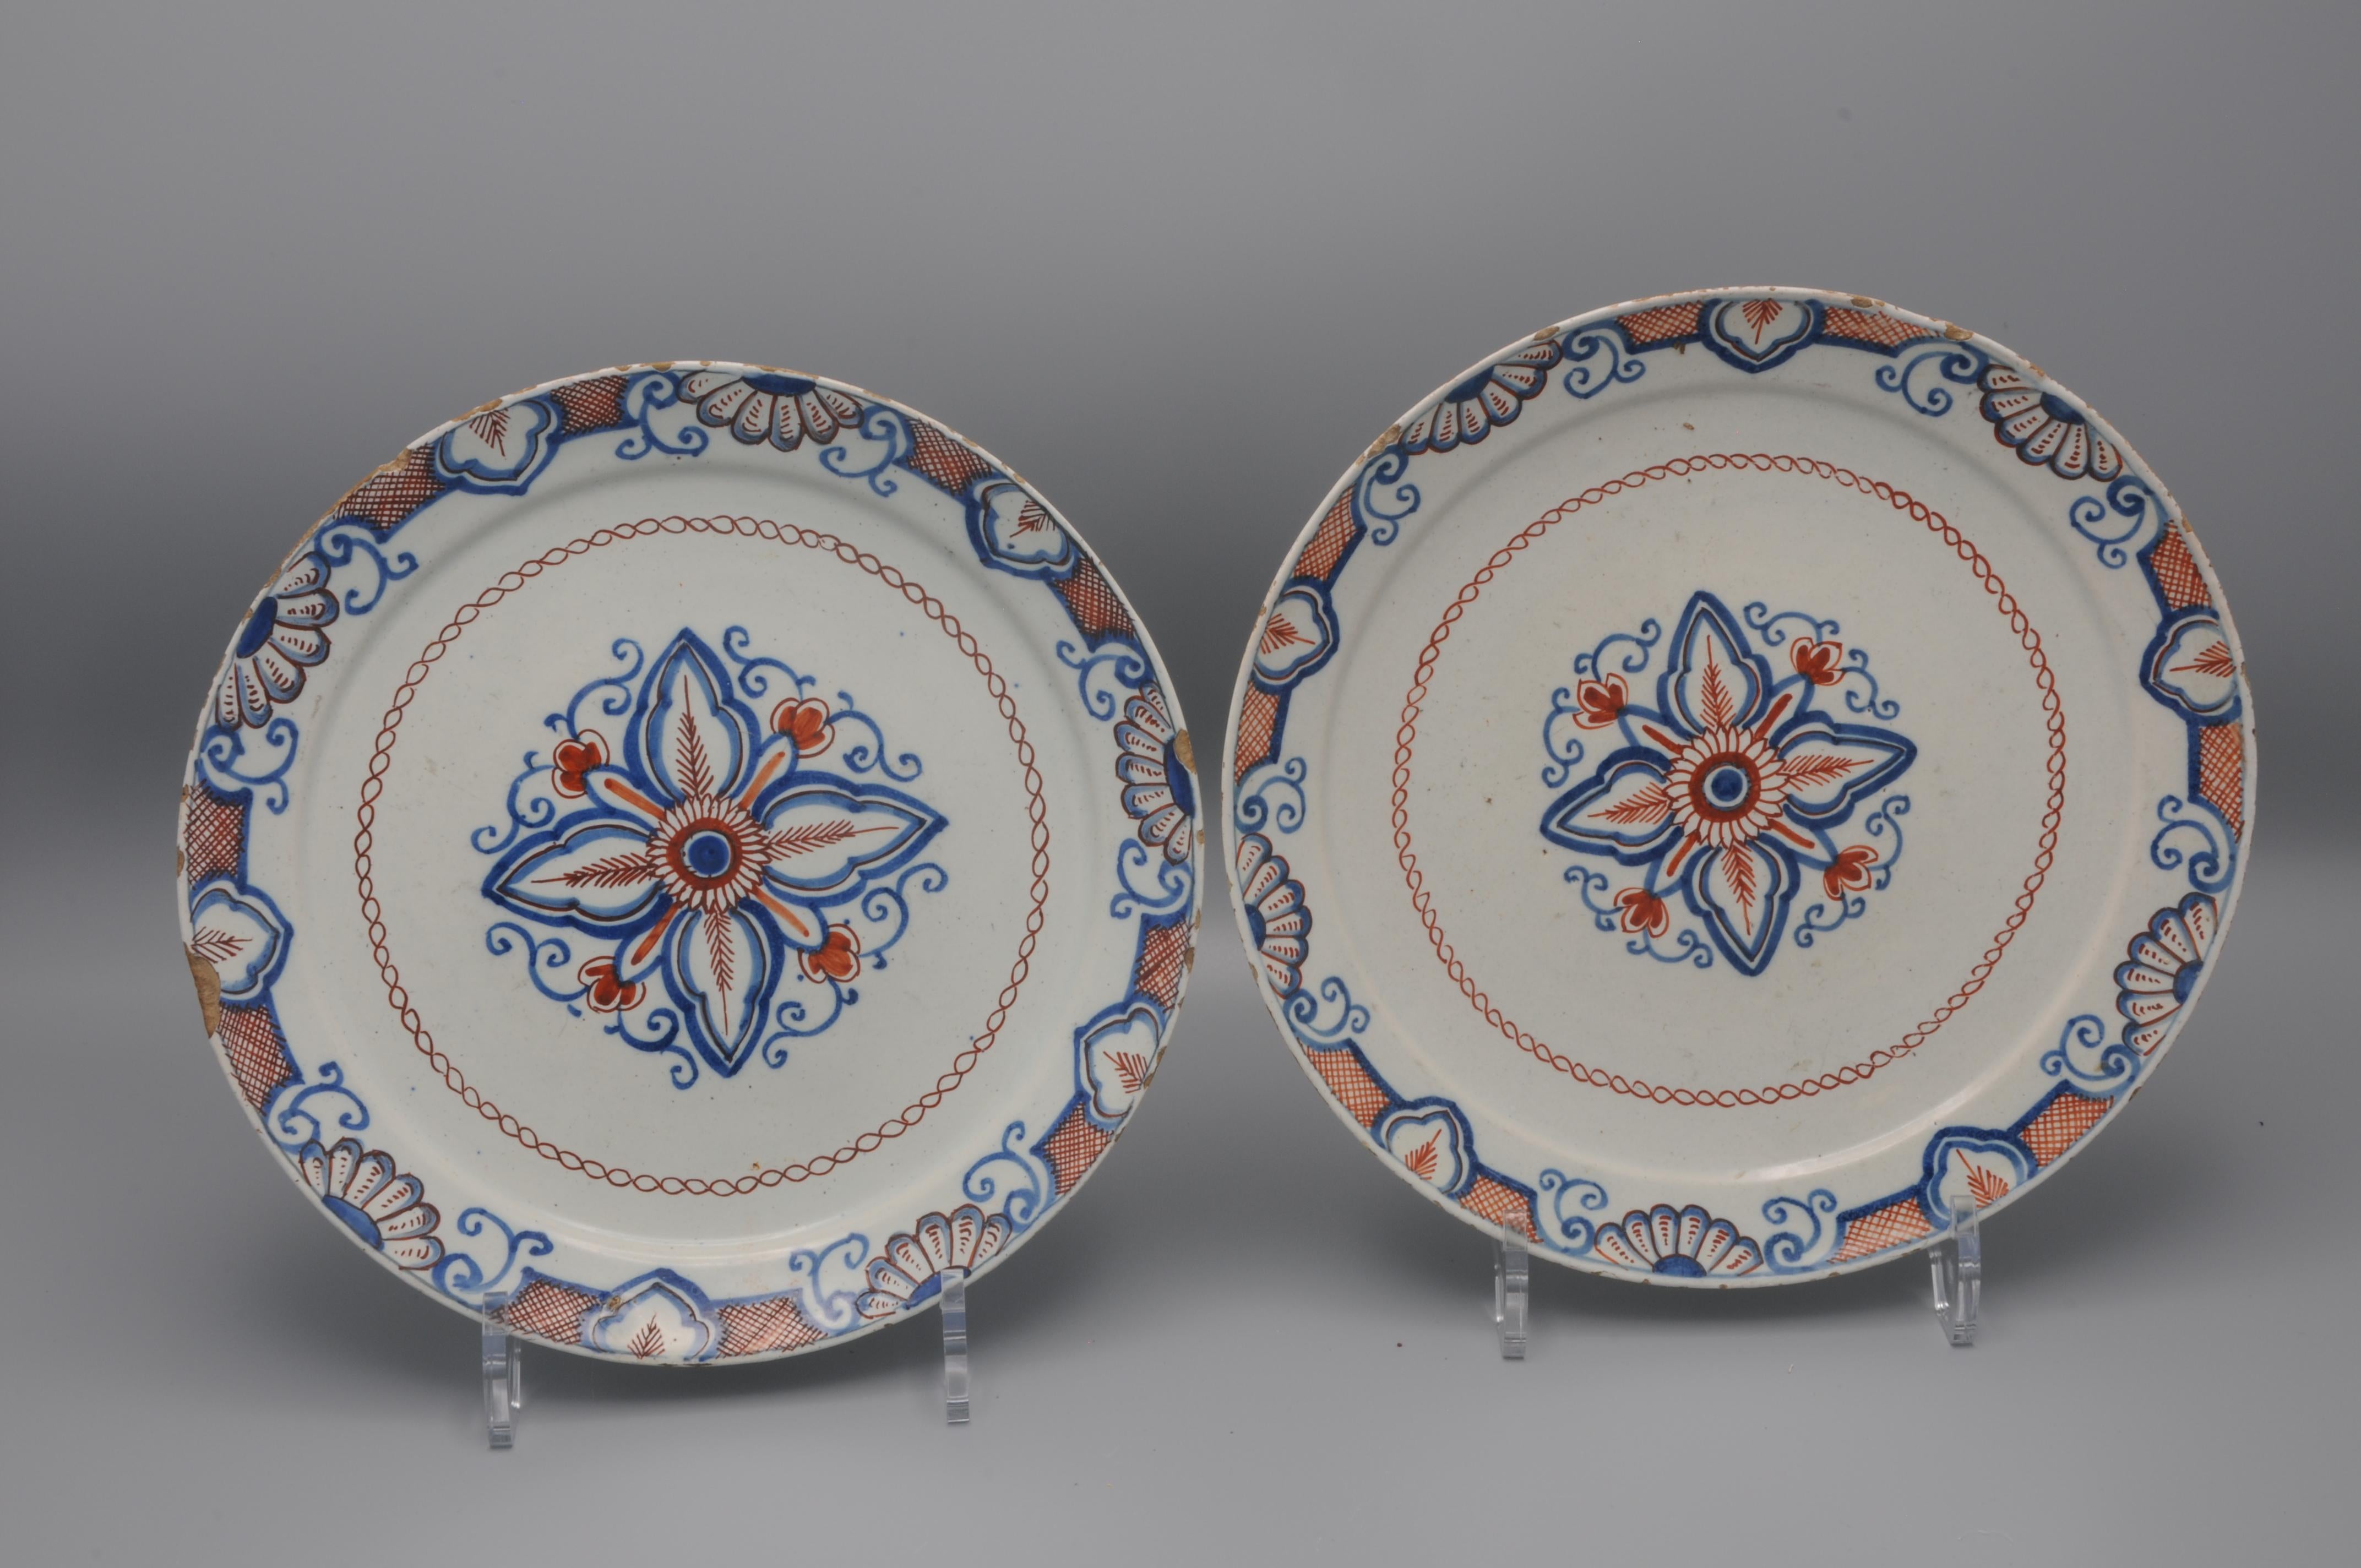 Excellent pair of mid 18th century Delftware plates with a rare geometrical decoration of a stylized flower with foliate scrolls. 
Border adorned with foliage scrolls and shells in Daniel Marot style. 

Marked IVL for Johannes and Margaretha van